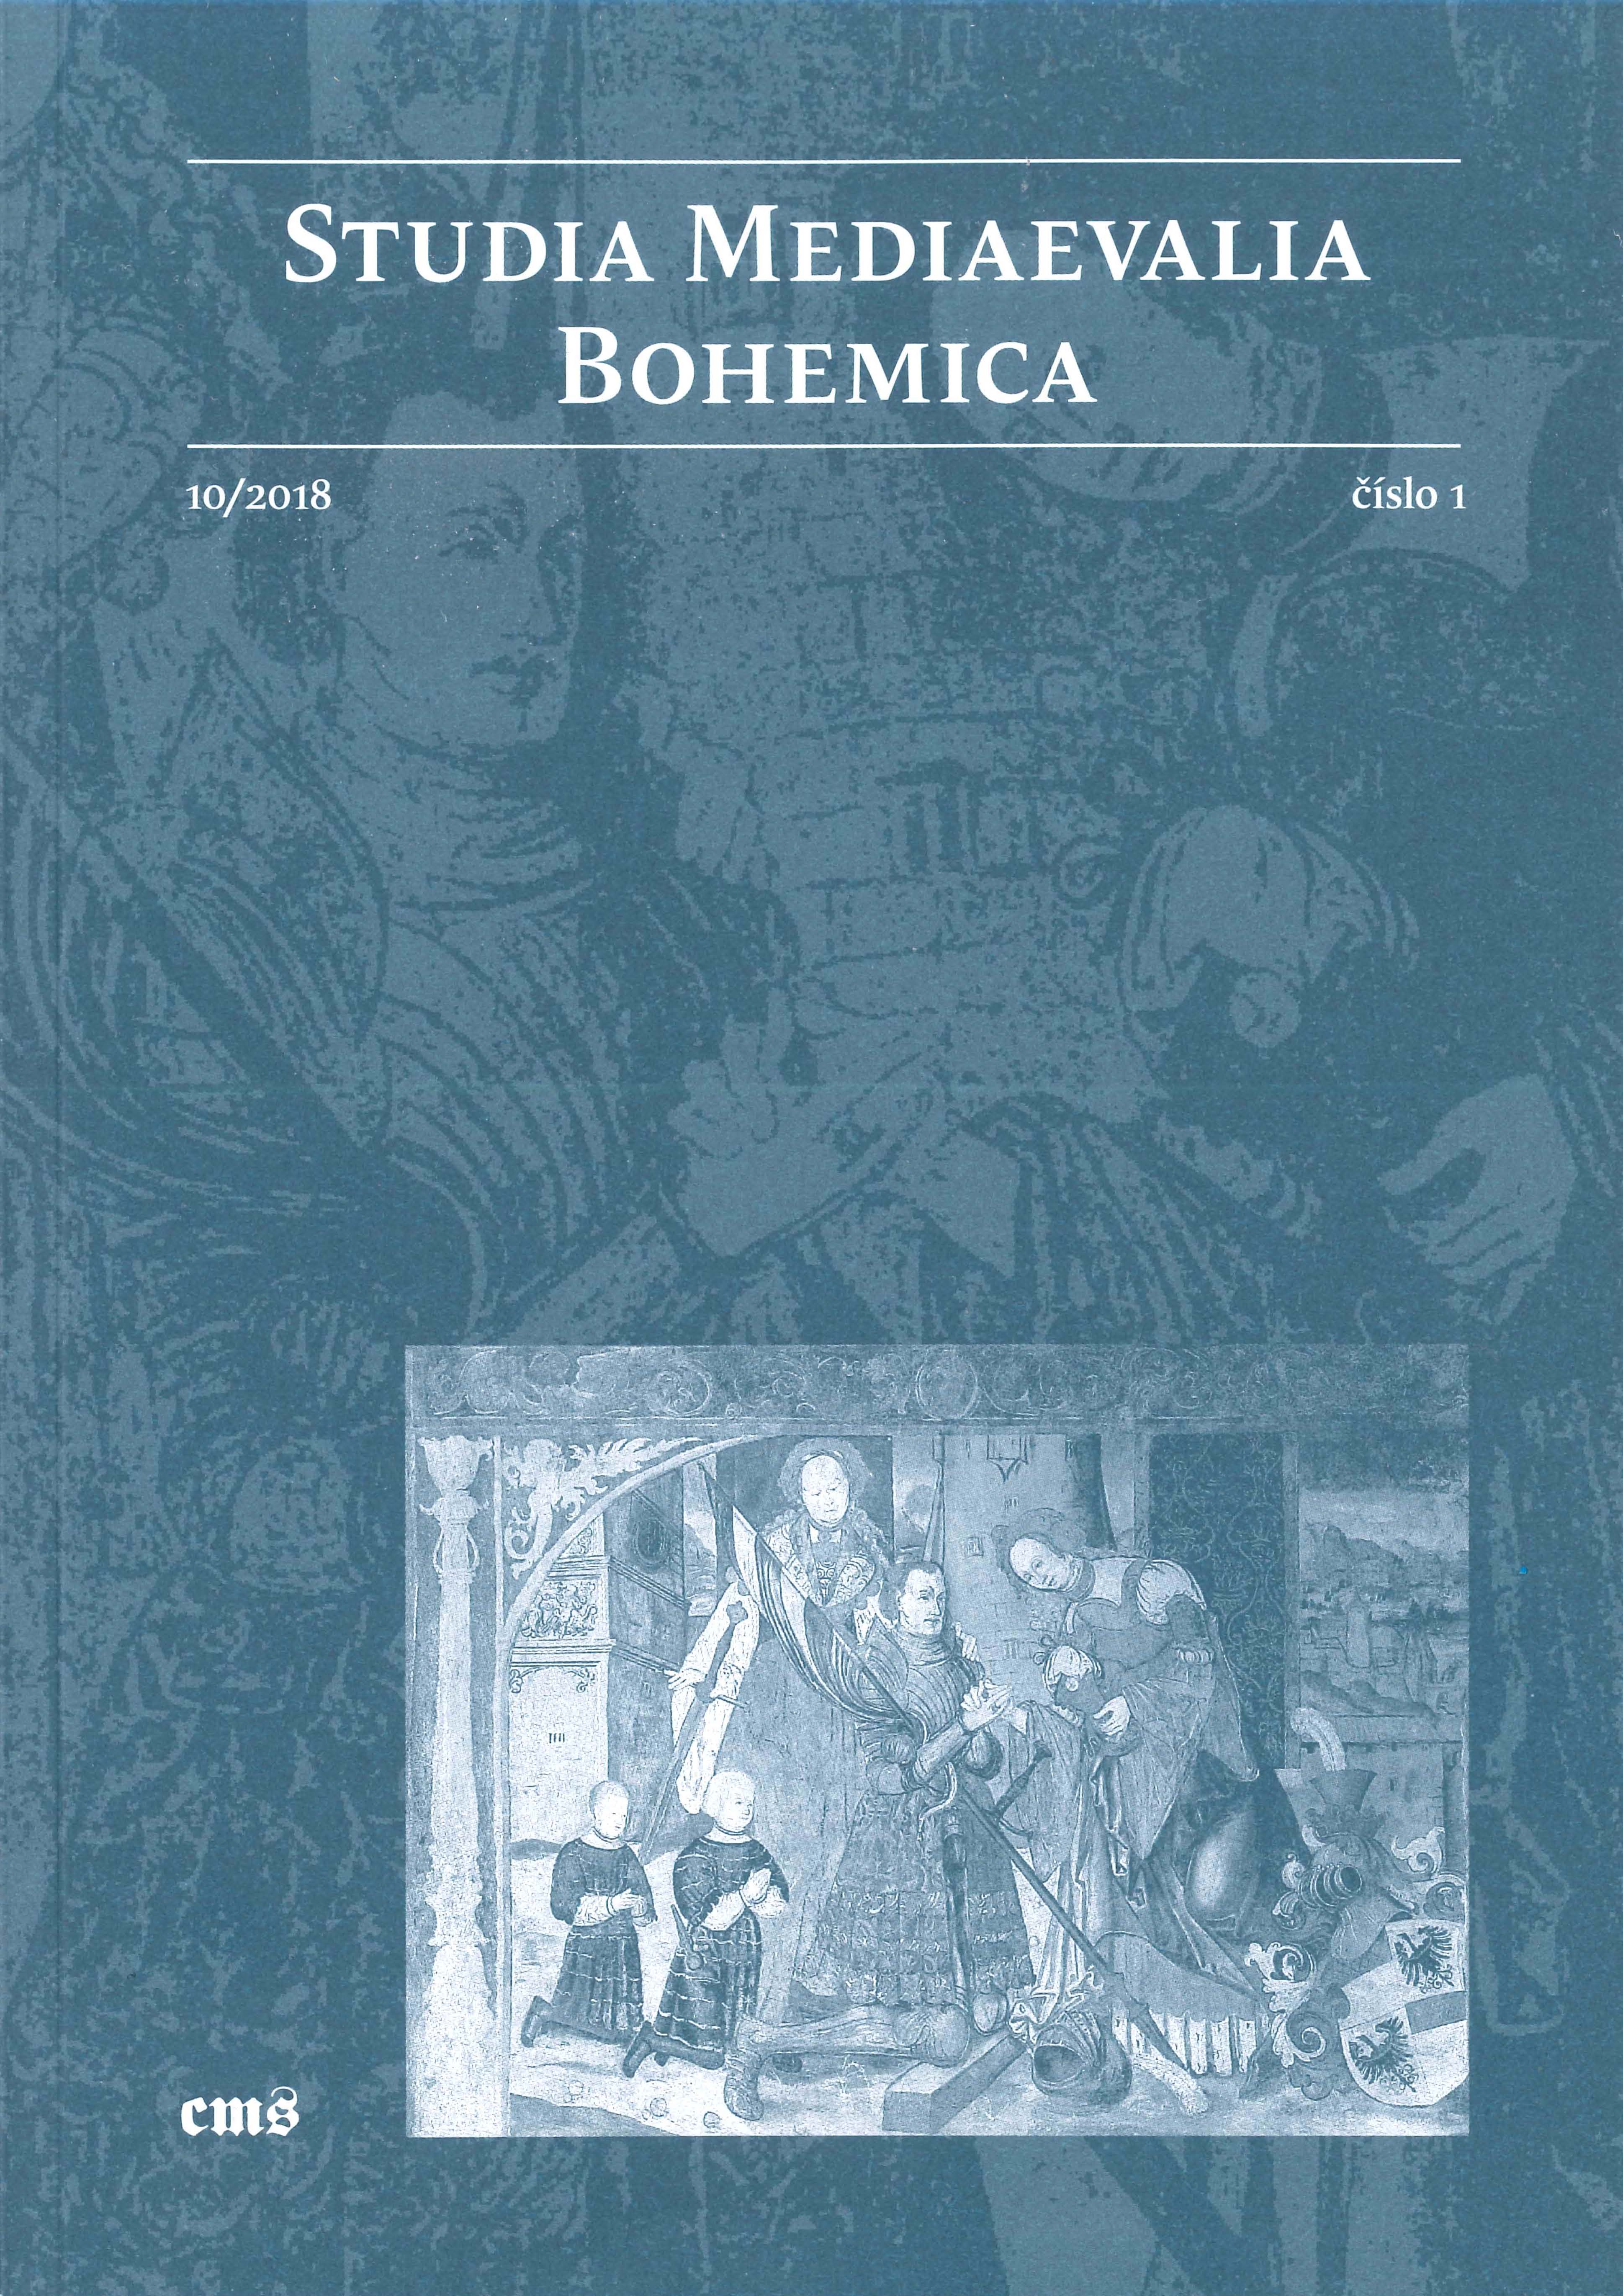 Remarks on the event of the Čáčovice Museum held on the 50th anniversary of the finding of a “burial site with manifestations of vampirism” Cover Image